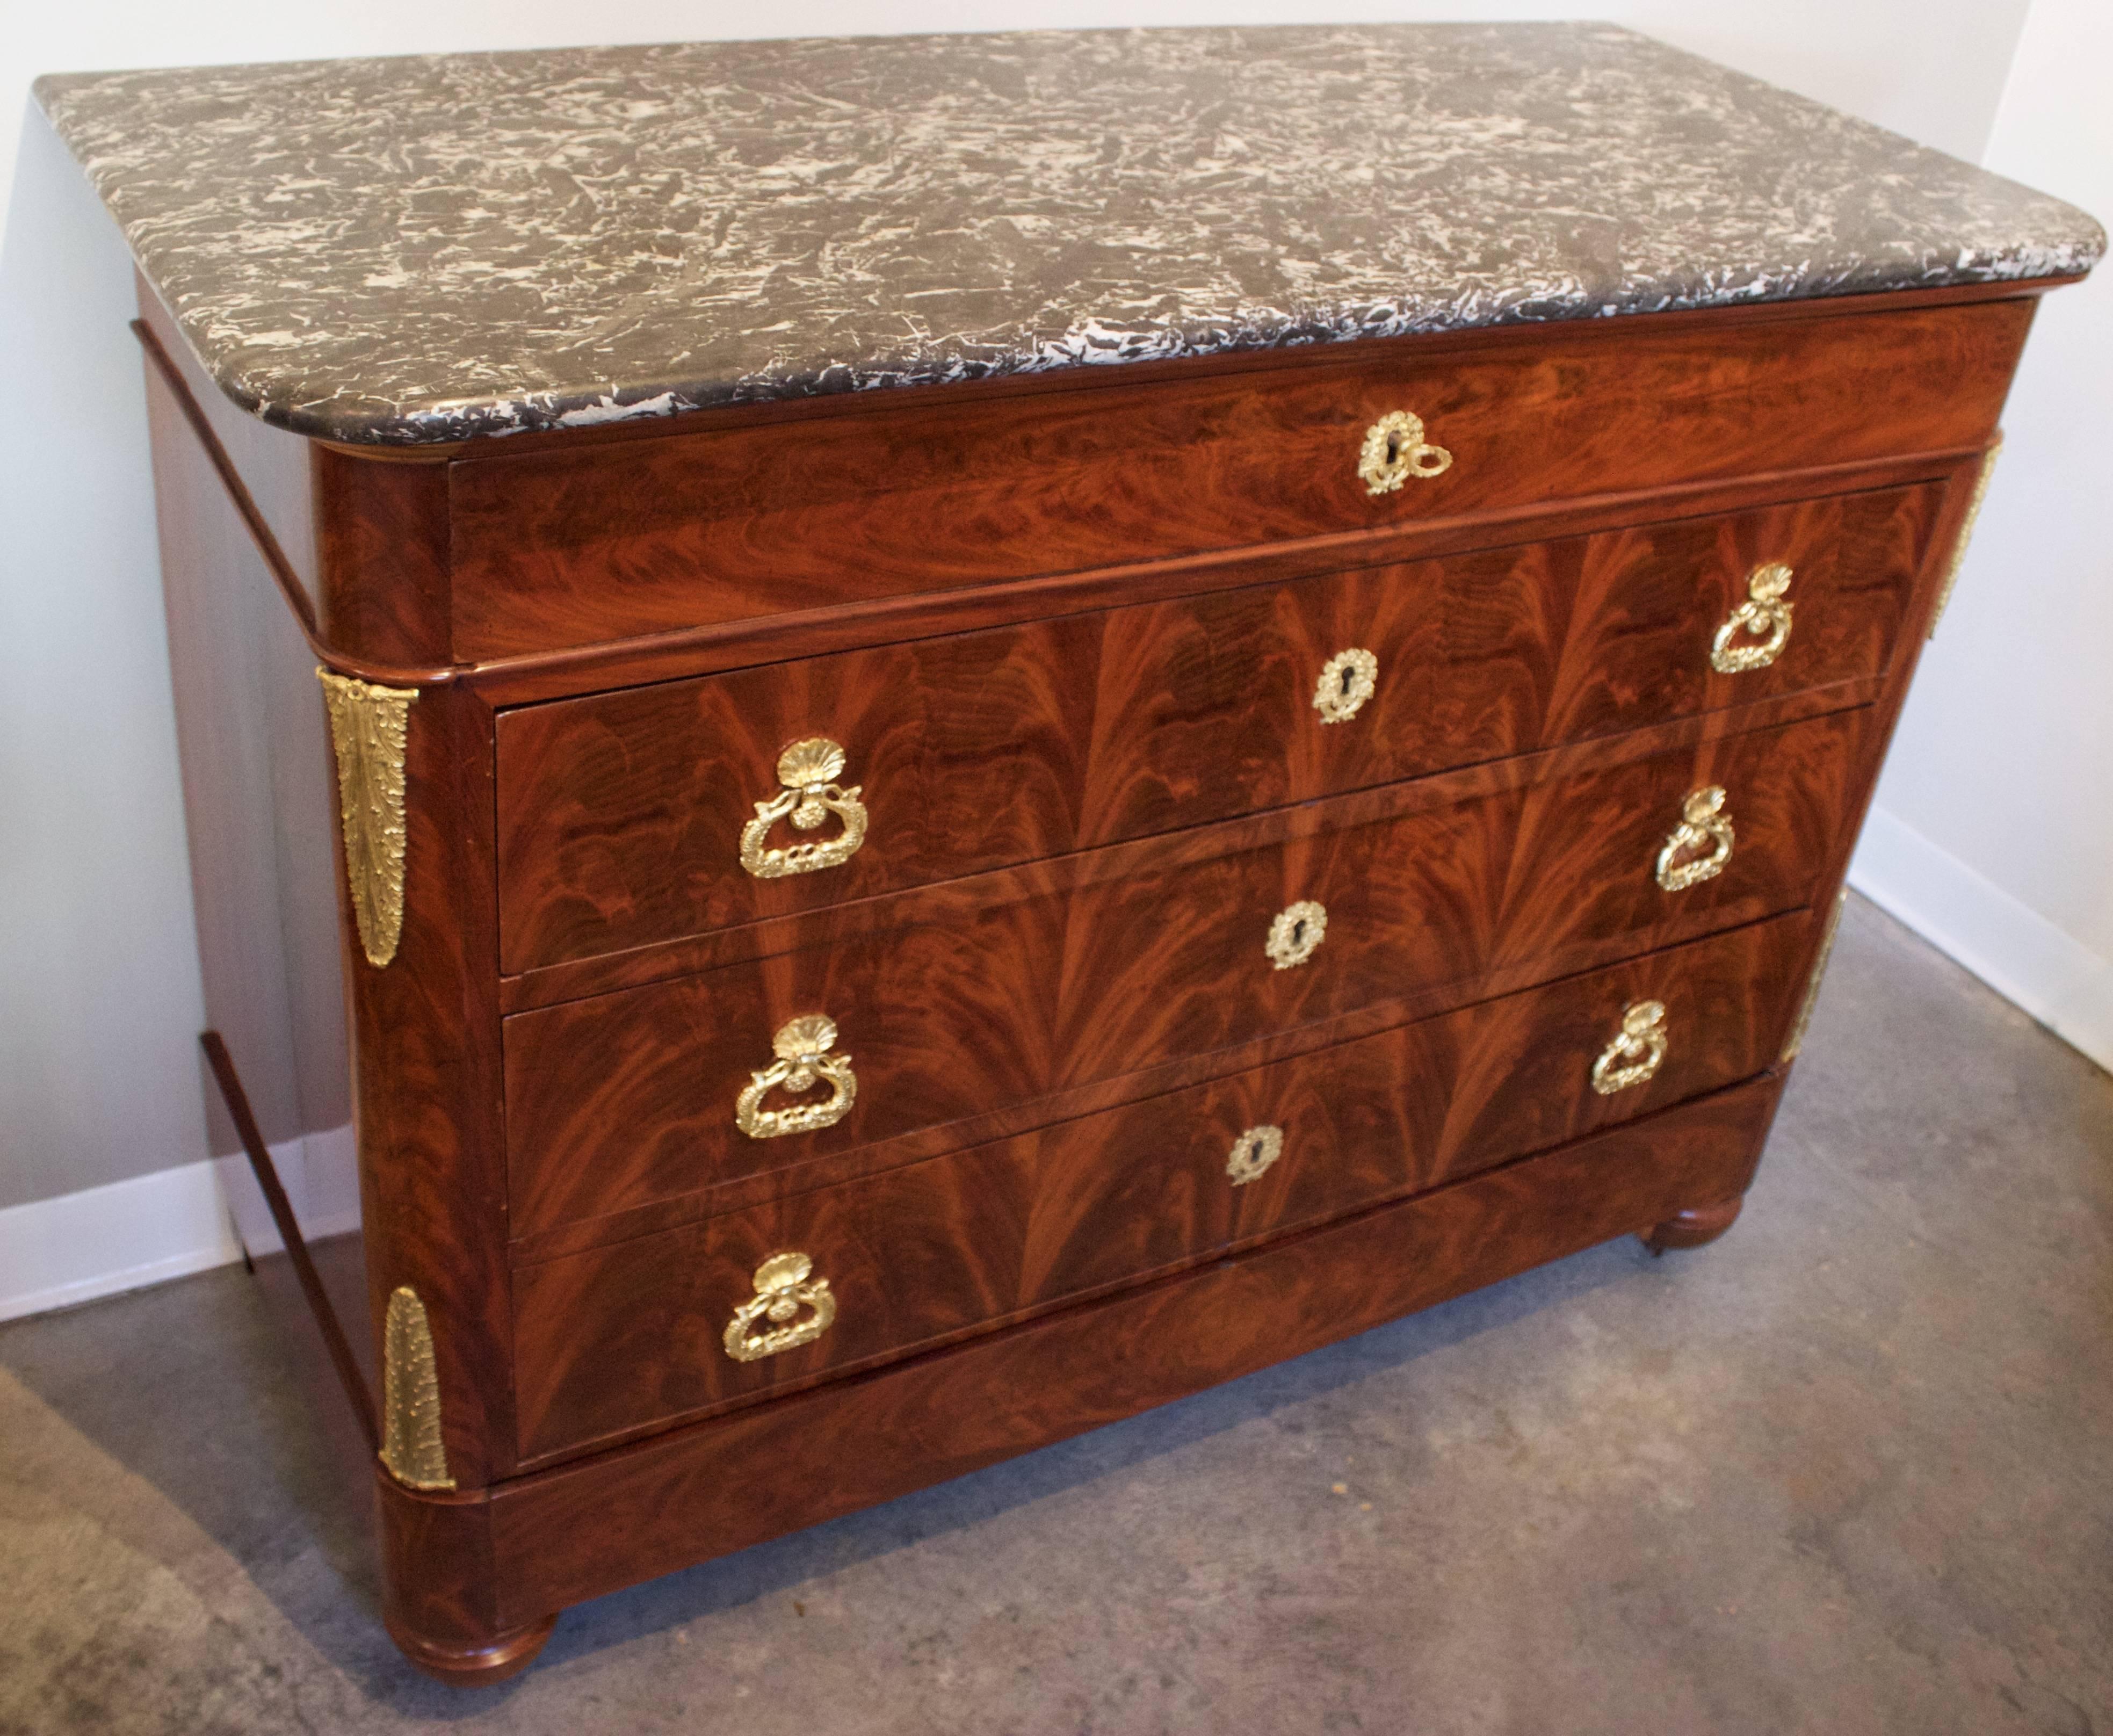 Beautiful and authentic early 19th century commode in 